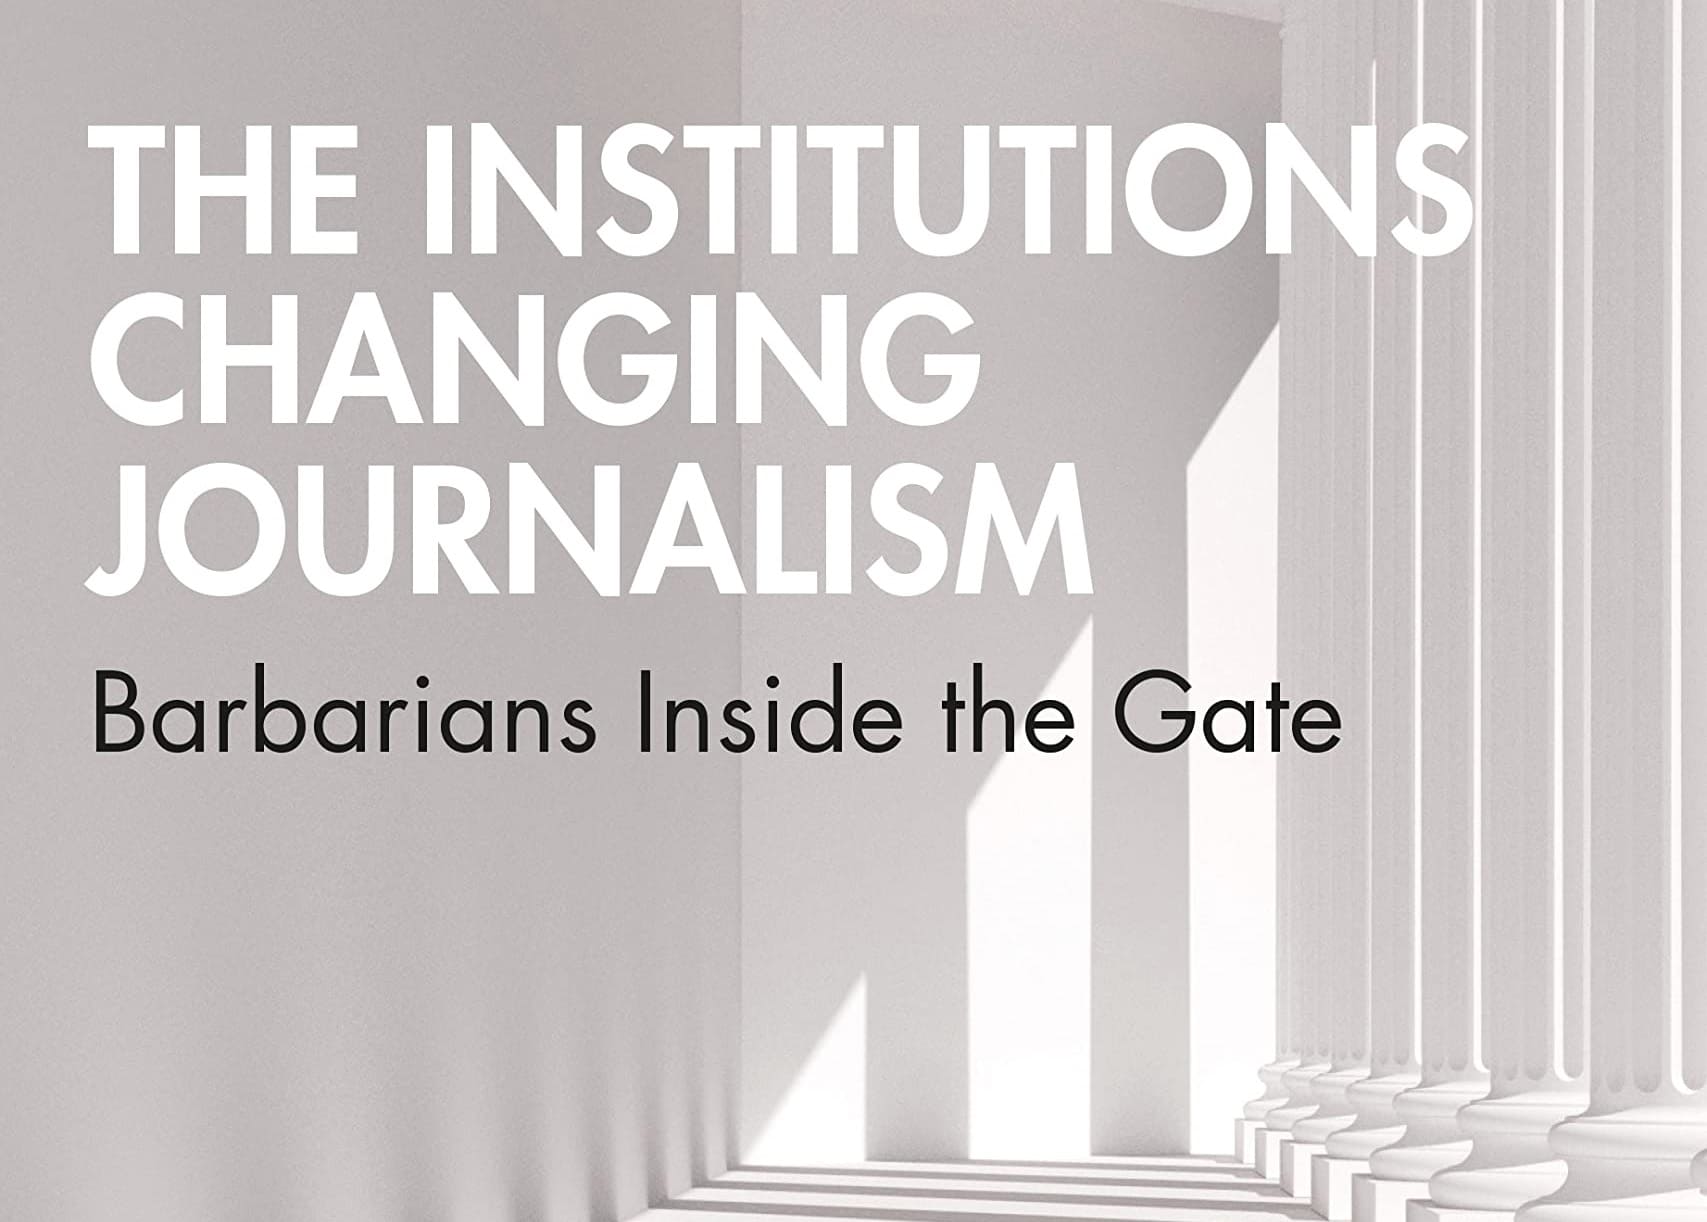 The Institutions Changing Journalism book